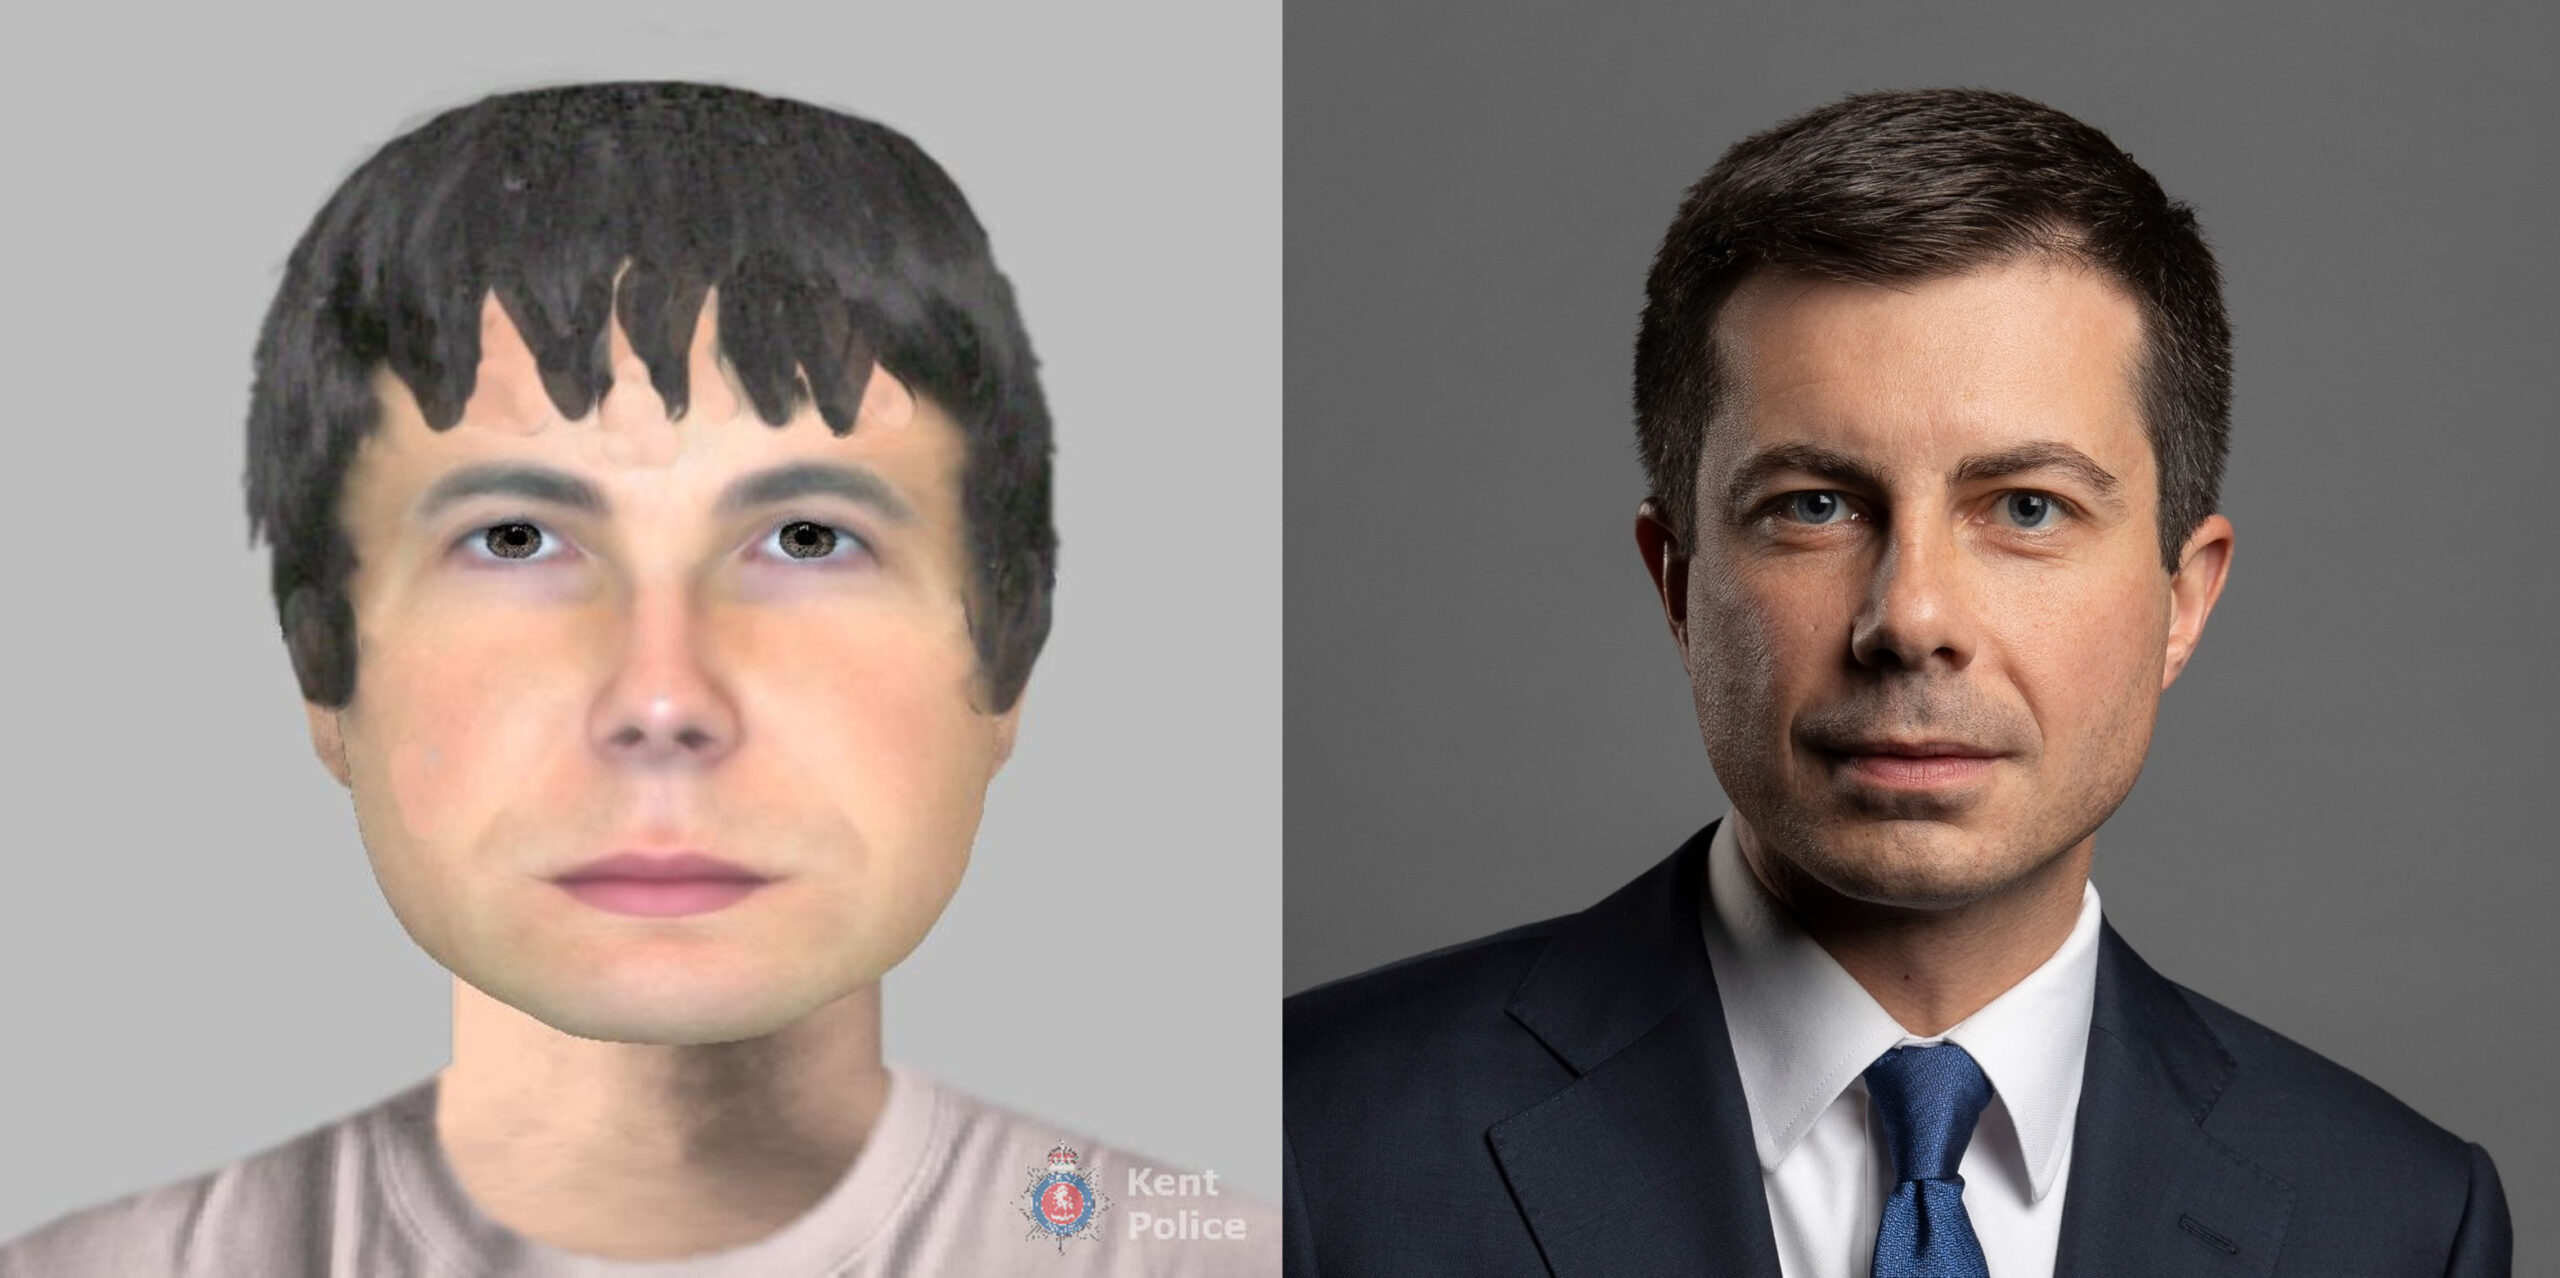 UK Police Release Wanted Poster for Man Who Looks Exactly Like Pete Buttigieg